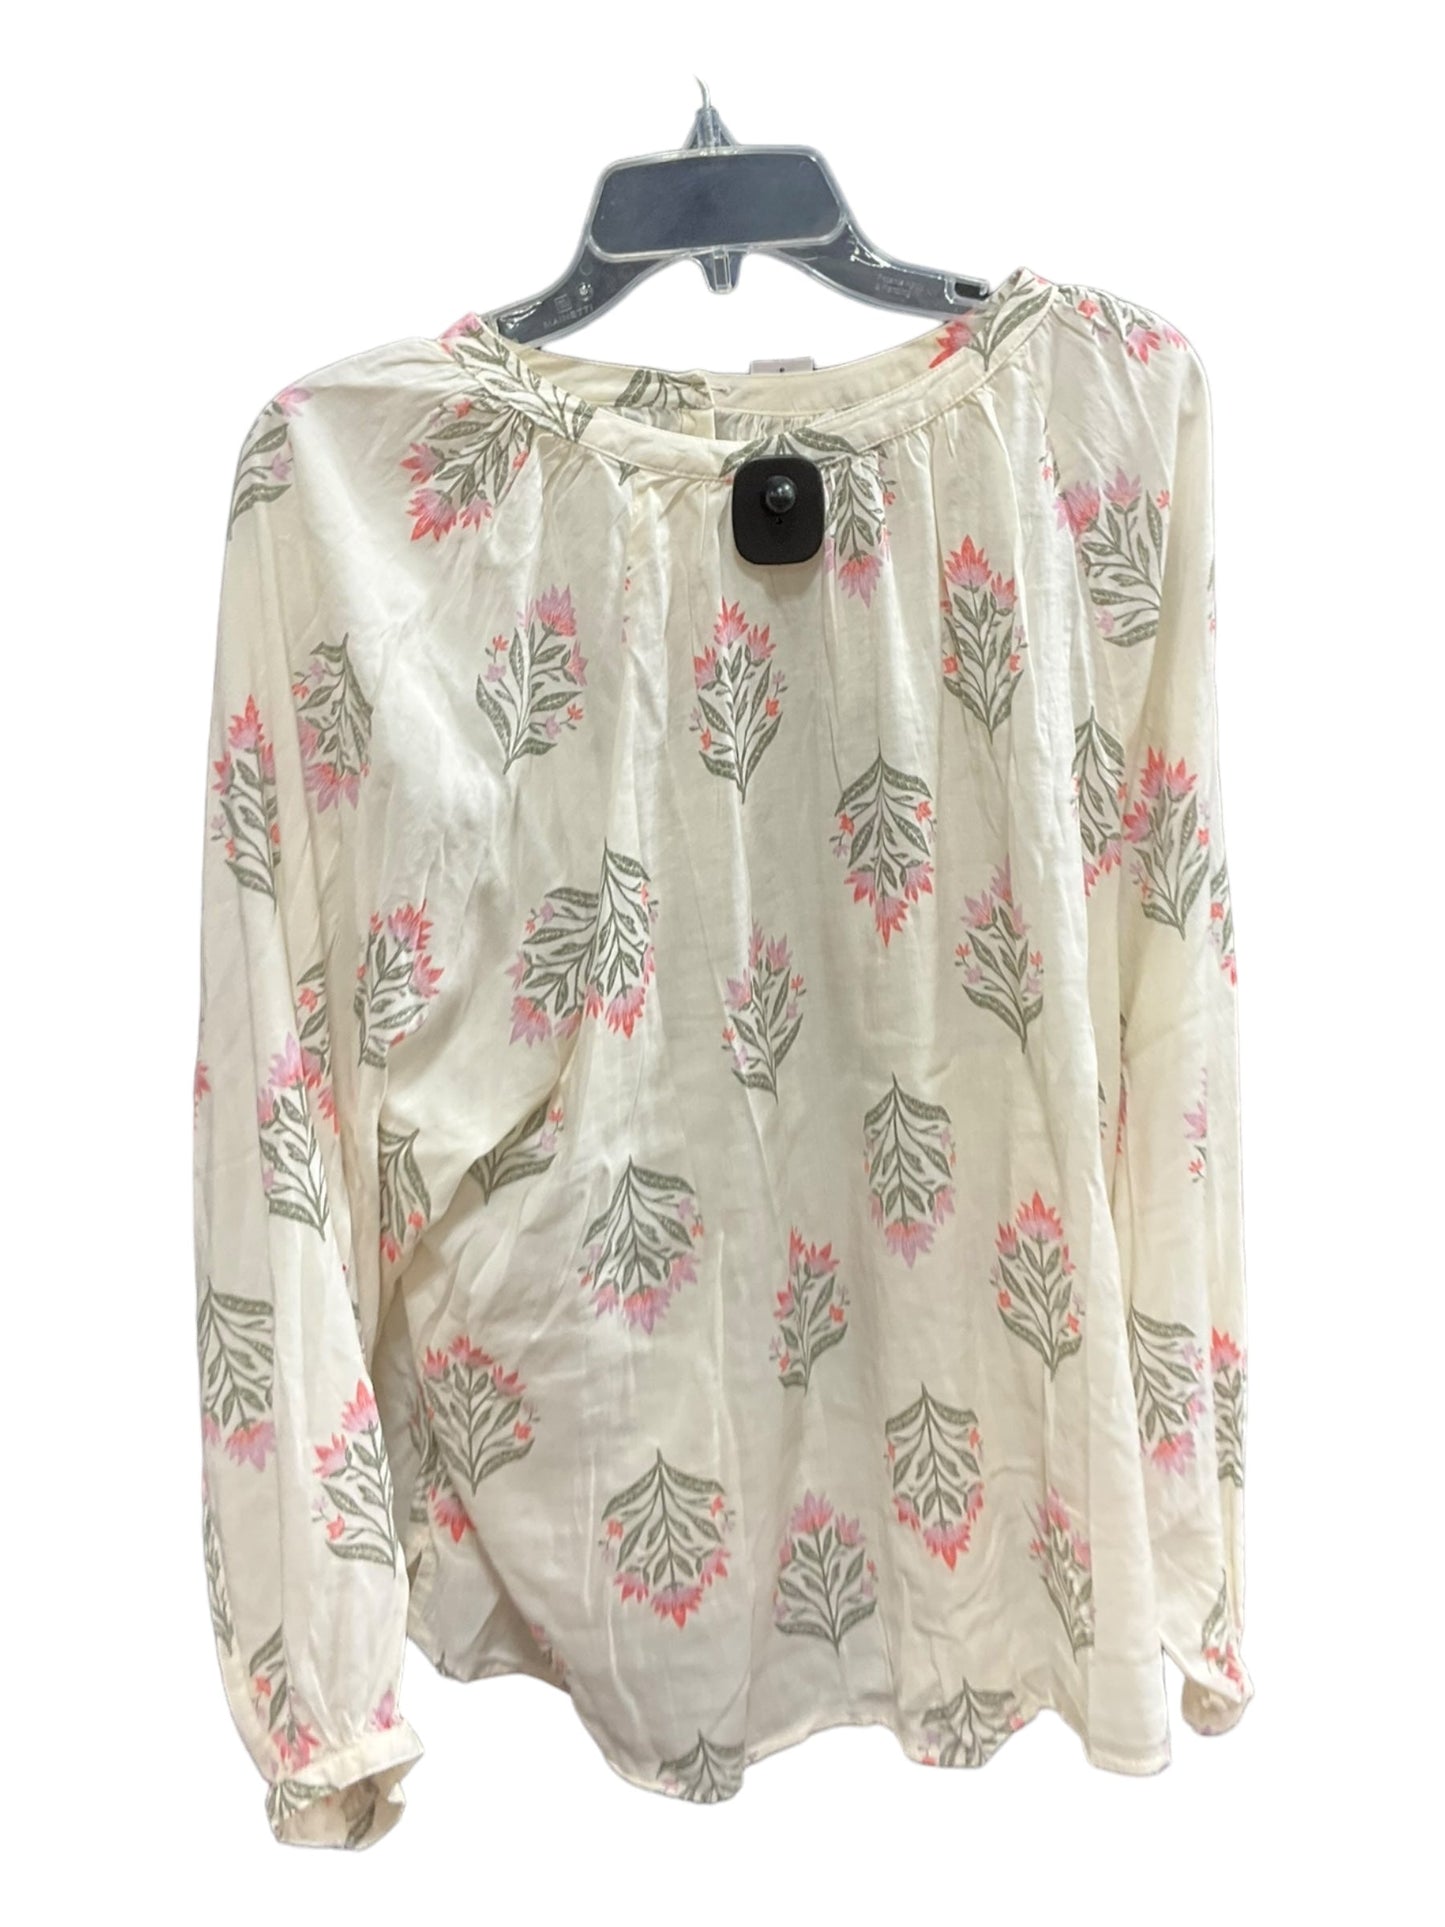 Floral Print Top Long Sleeve Old Navy, Size Xl